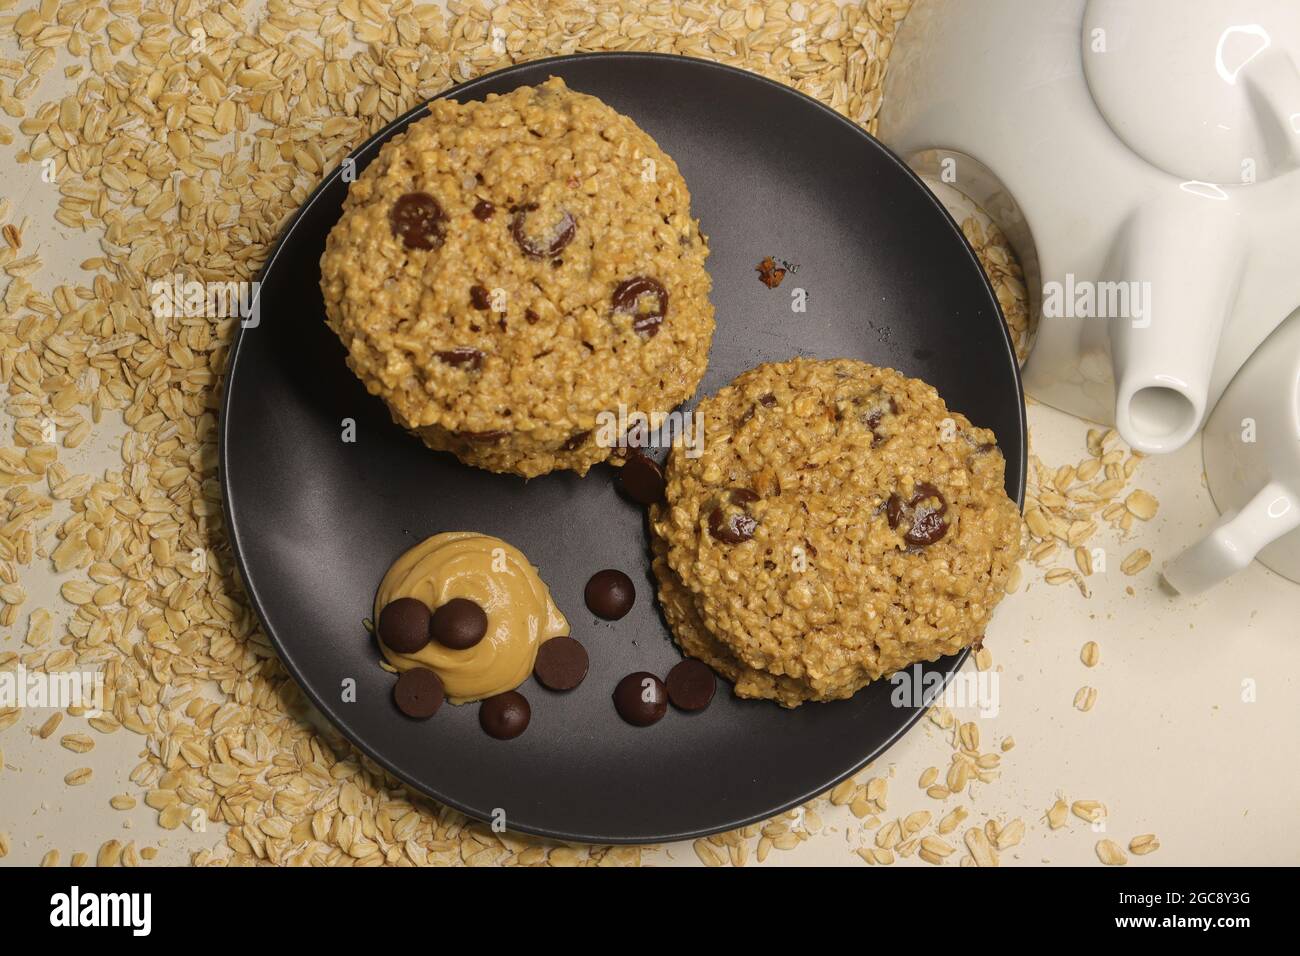 Peanut butter oatmeal Choco chips cookies. A home baked healthy snack. Shot on white background. Stock Photo